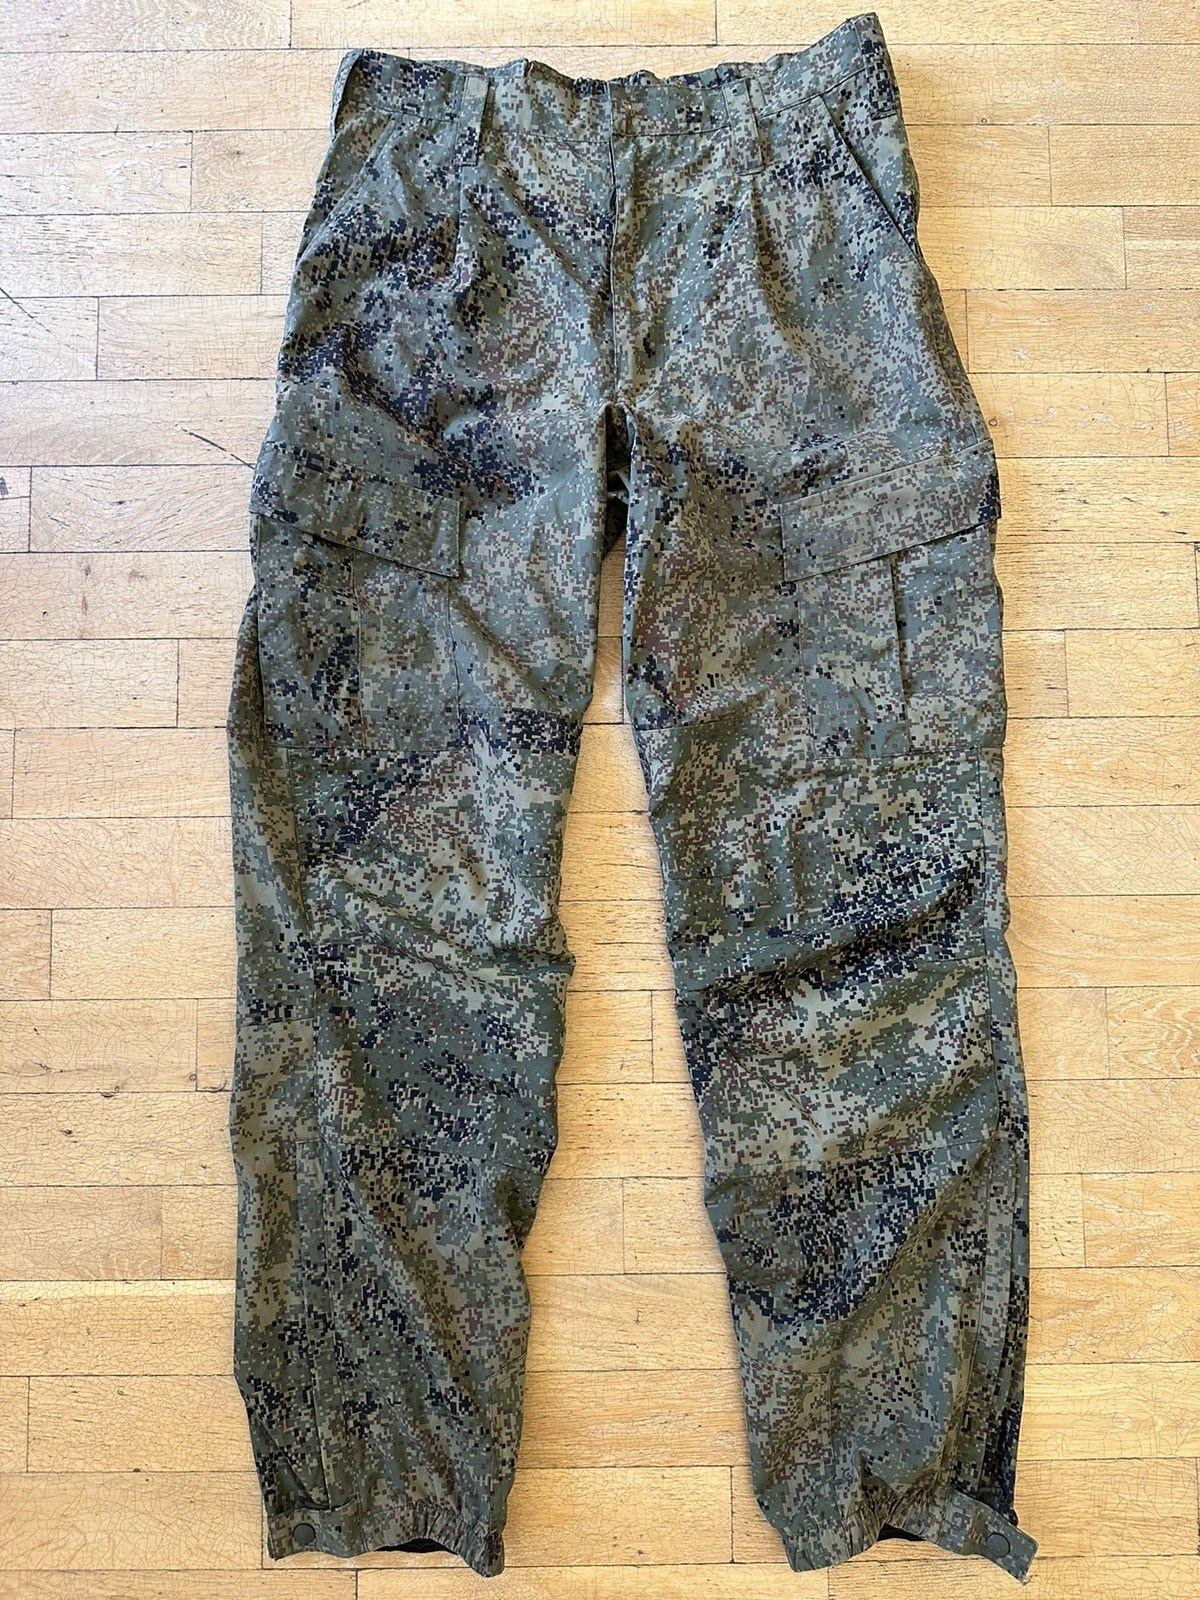 Original Russian Army Wind Tactical Pants Trousers Military Uniform VKBO L 52-6